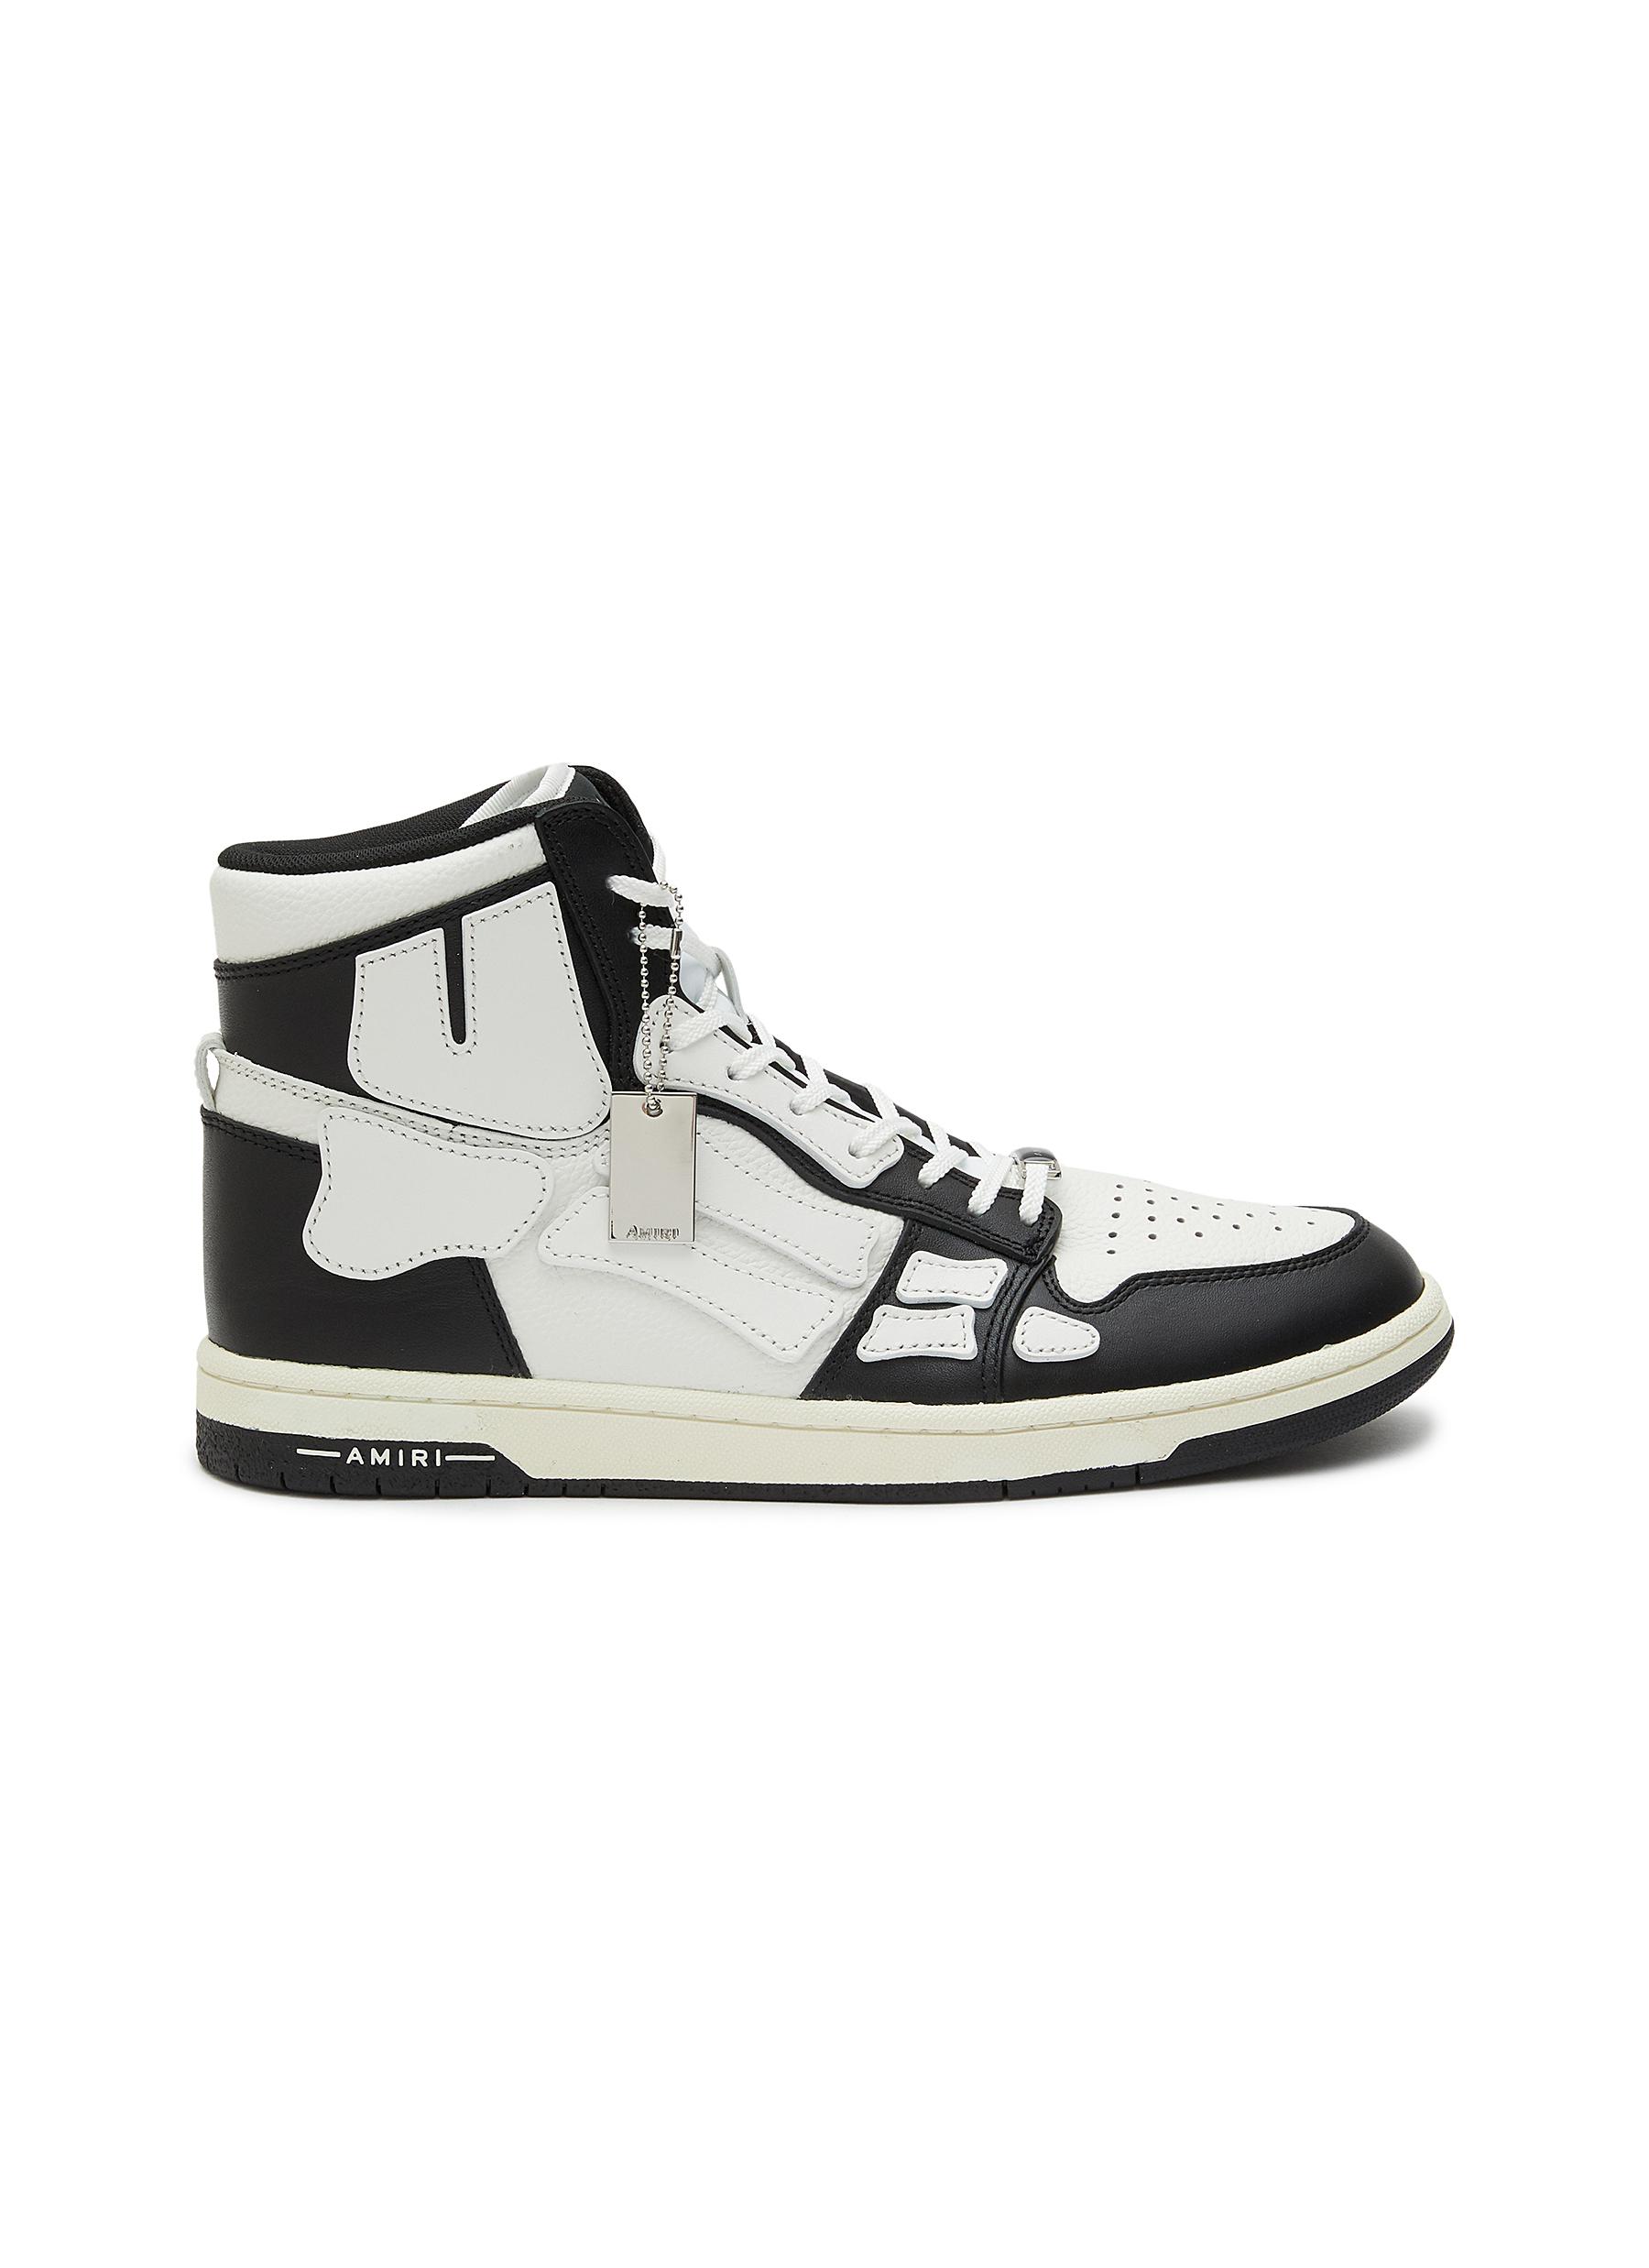 AMIRI ‘SKEL' HIGH TOP LACE UP LEATHER SNEAKERS